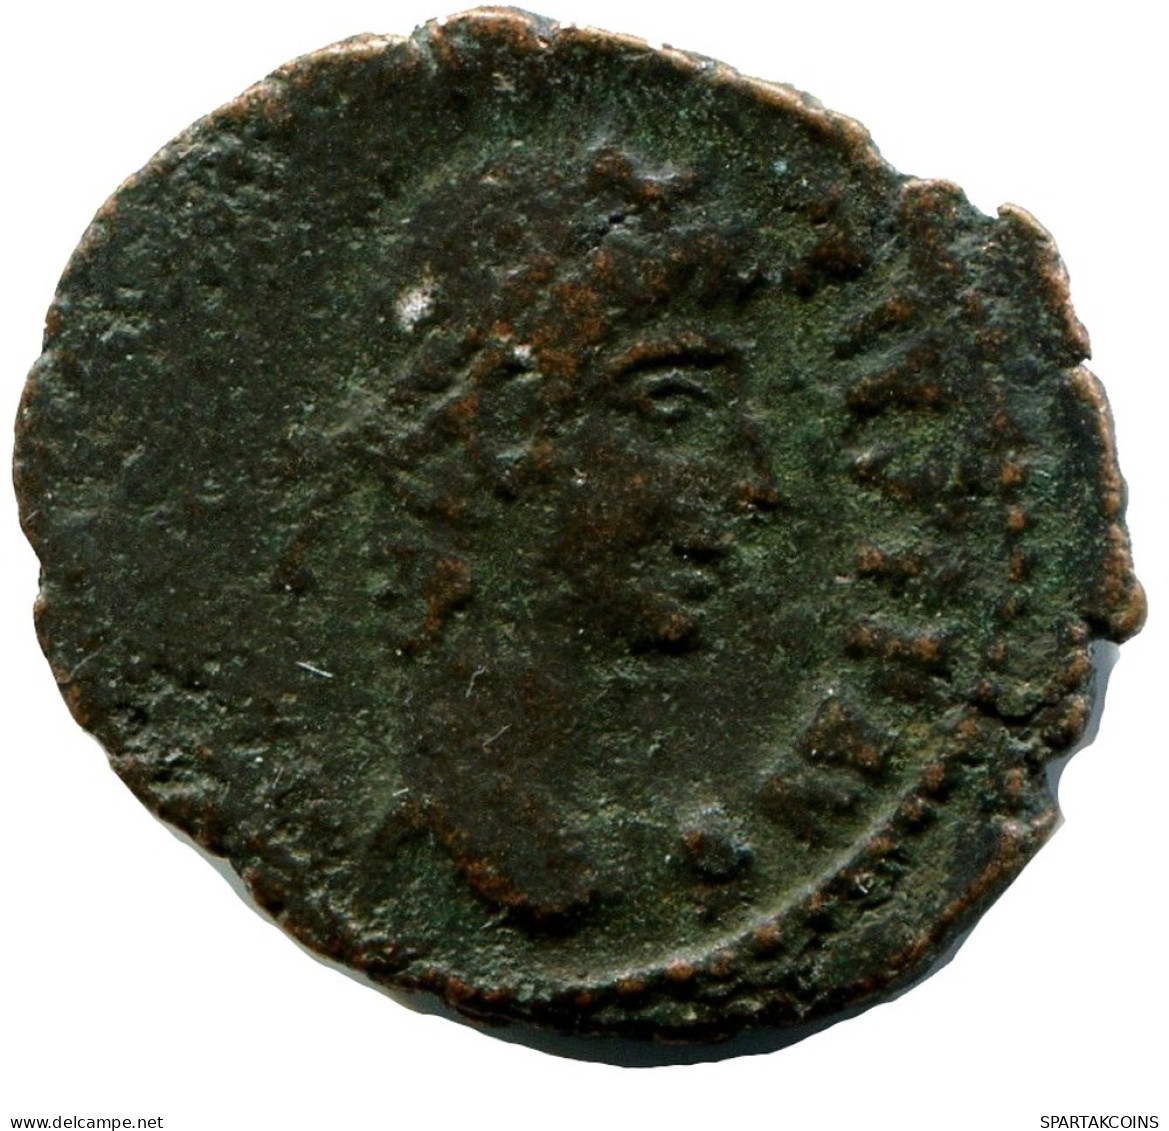 CONSTANTIUS II MINTED IN ANTIOCH FOUND IN IHNASYAH HOARD EGYPT #ANC11243.14.D.A - The Christian Empire (307 AD Tot 363 AD)